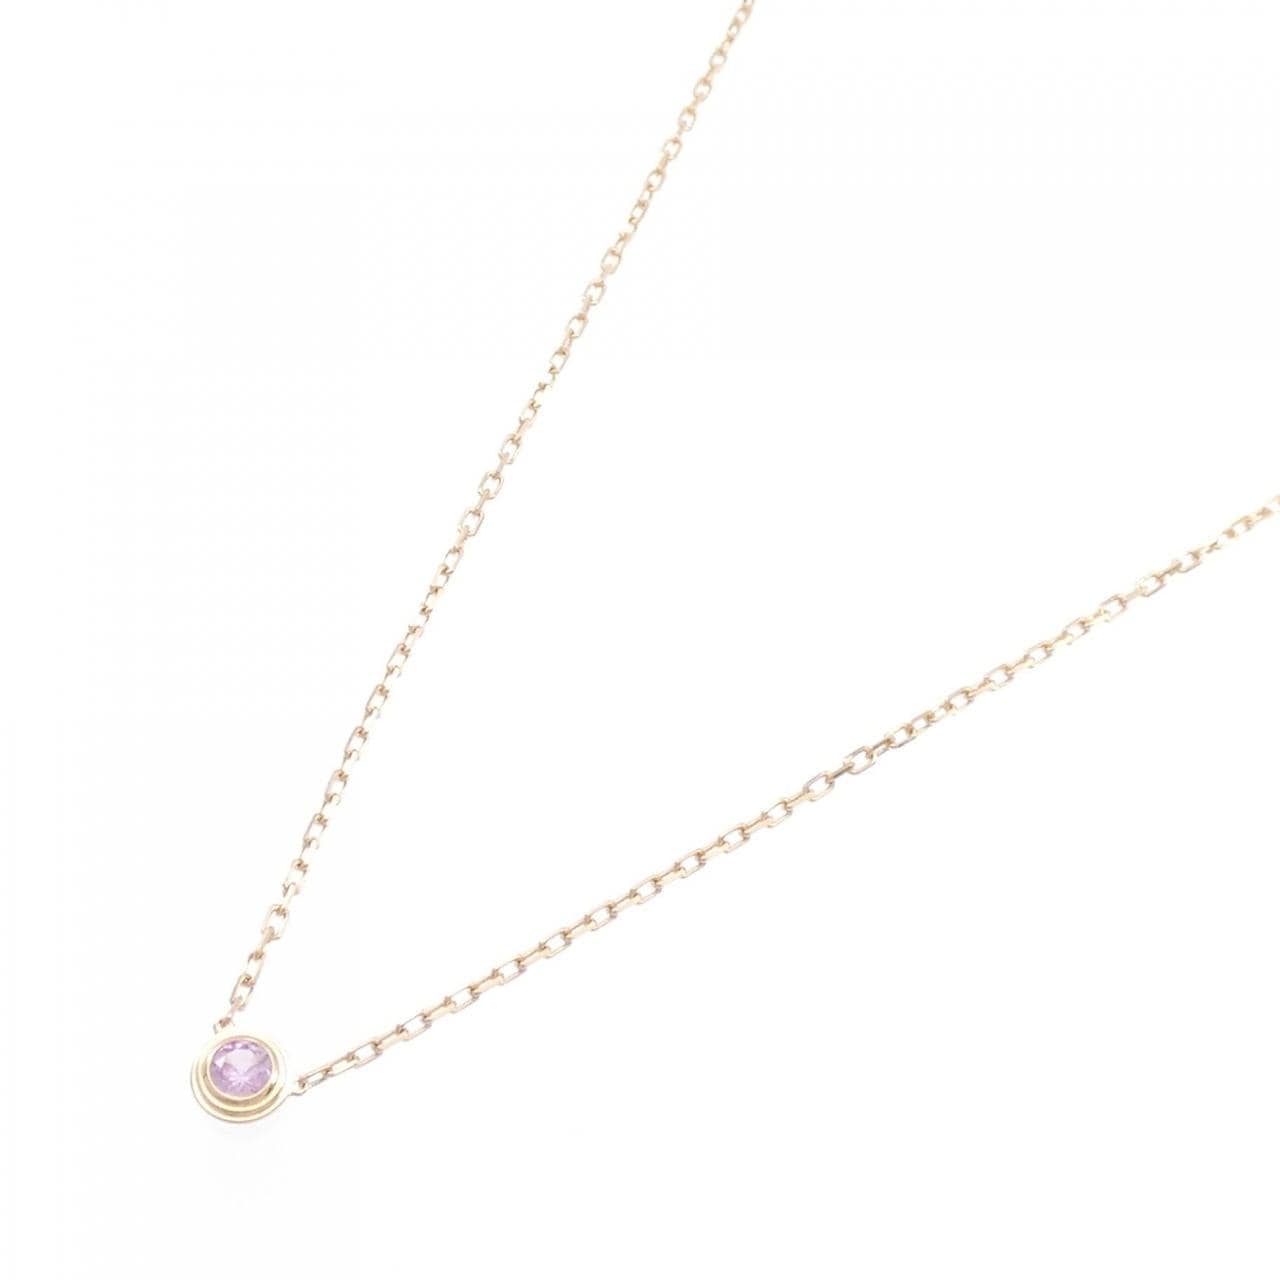 Cartier pink sapphire necklace in 18k rose gold with certificate